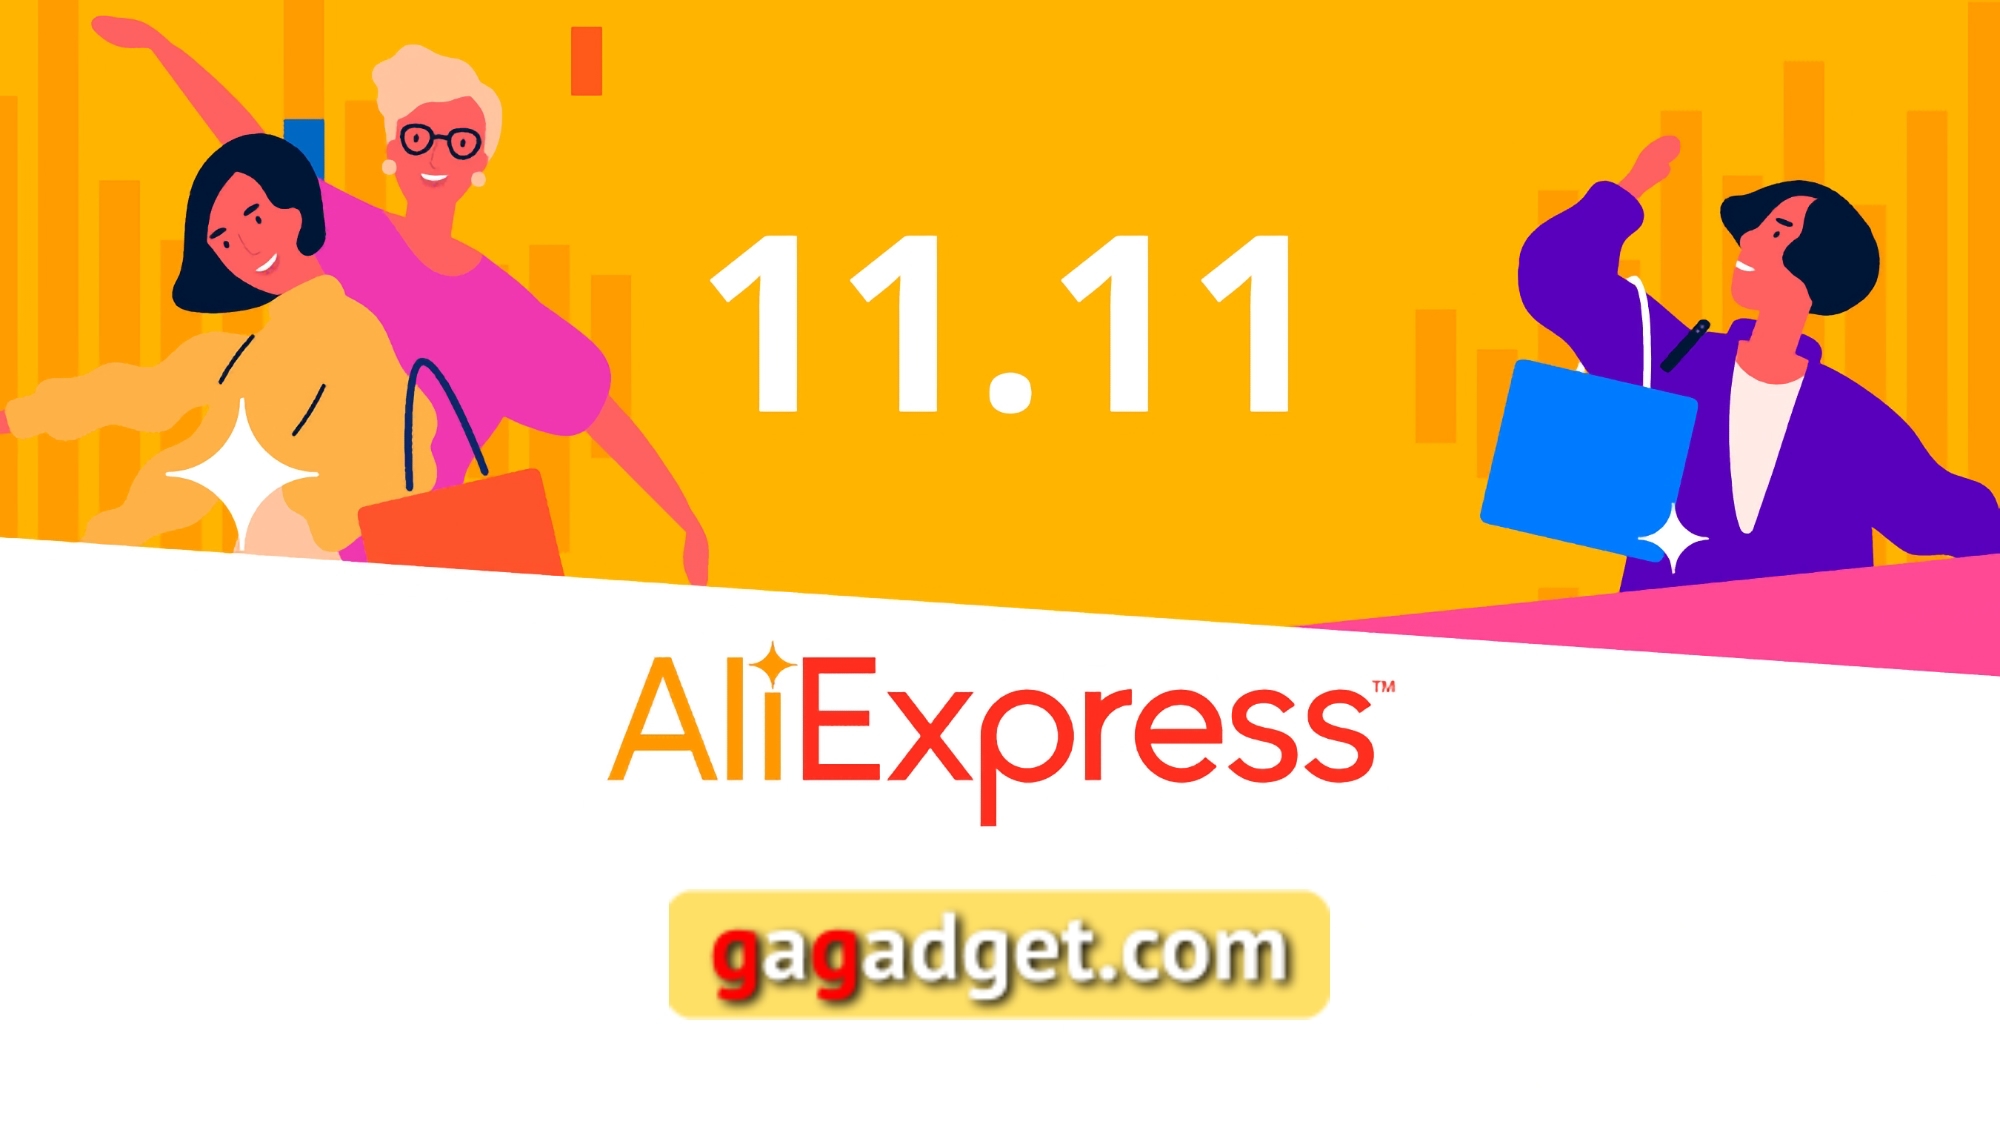 Special AliExpress promo codes for 11.11 sale for gagadget readers